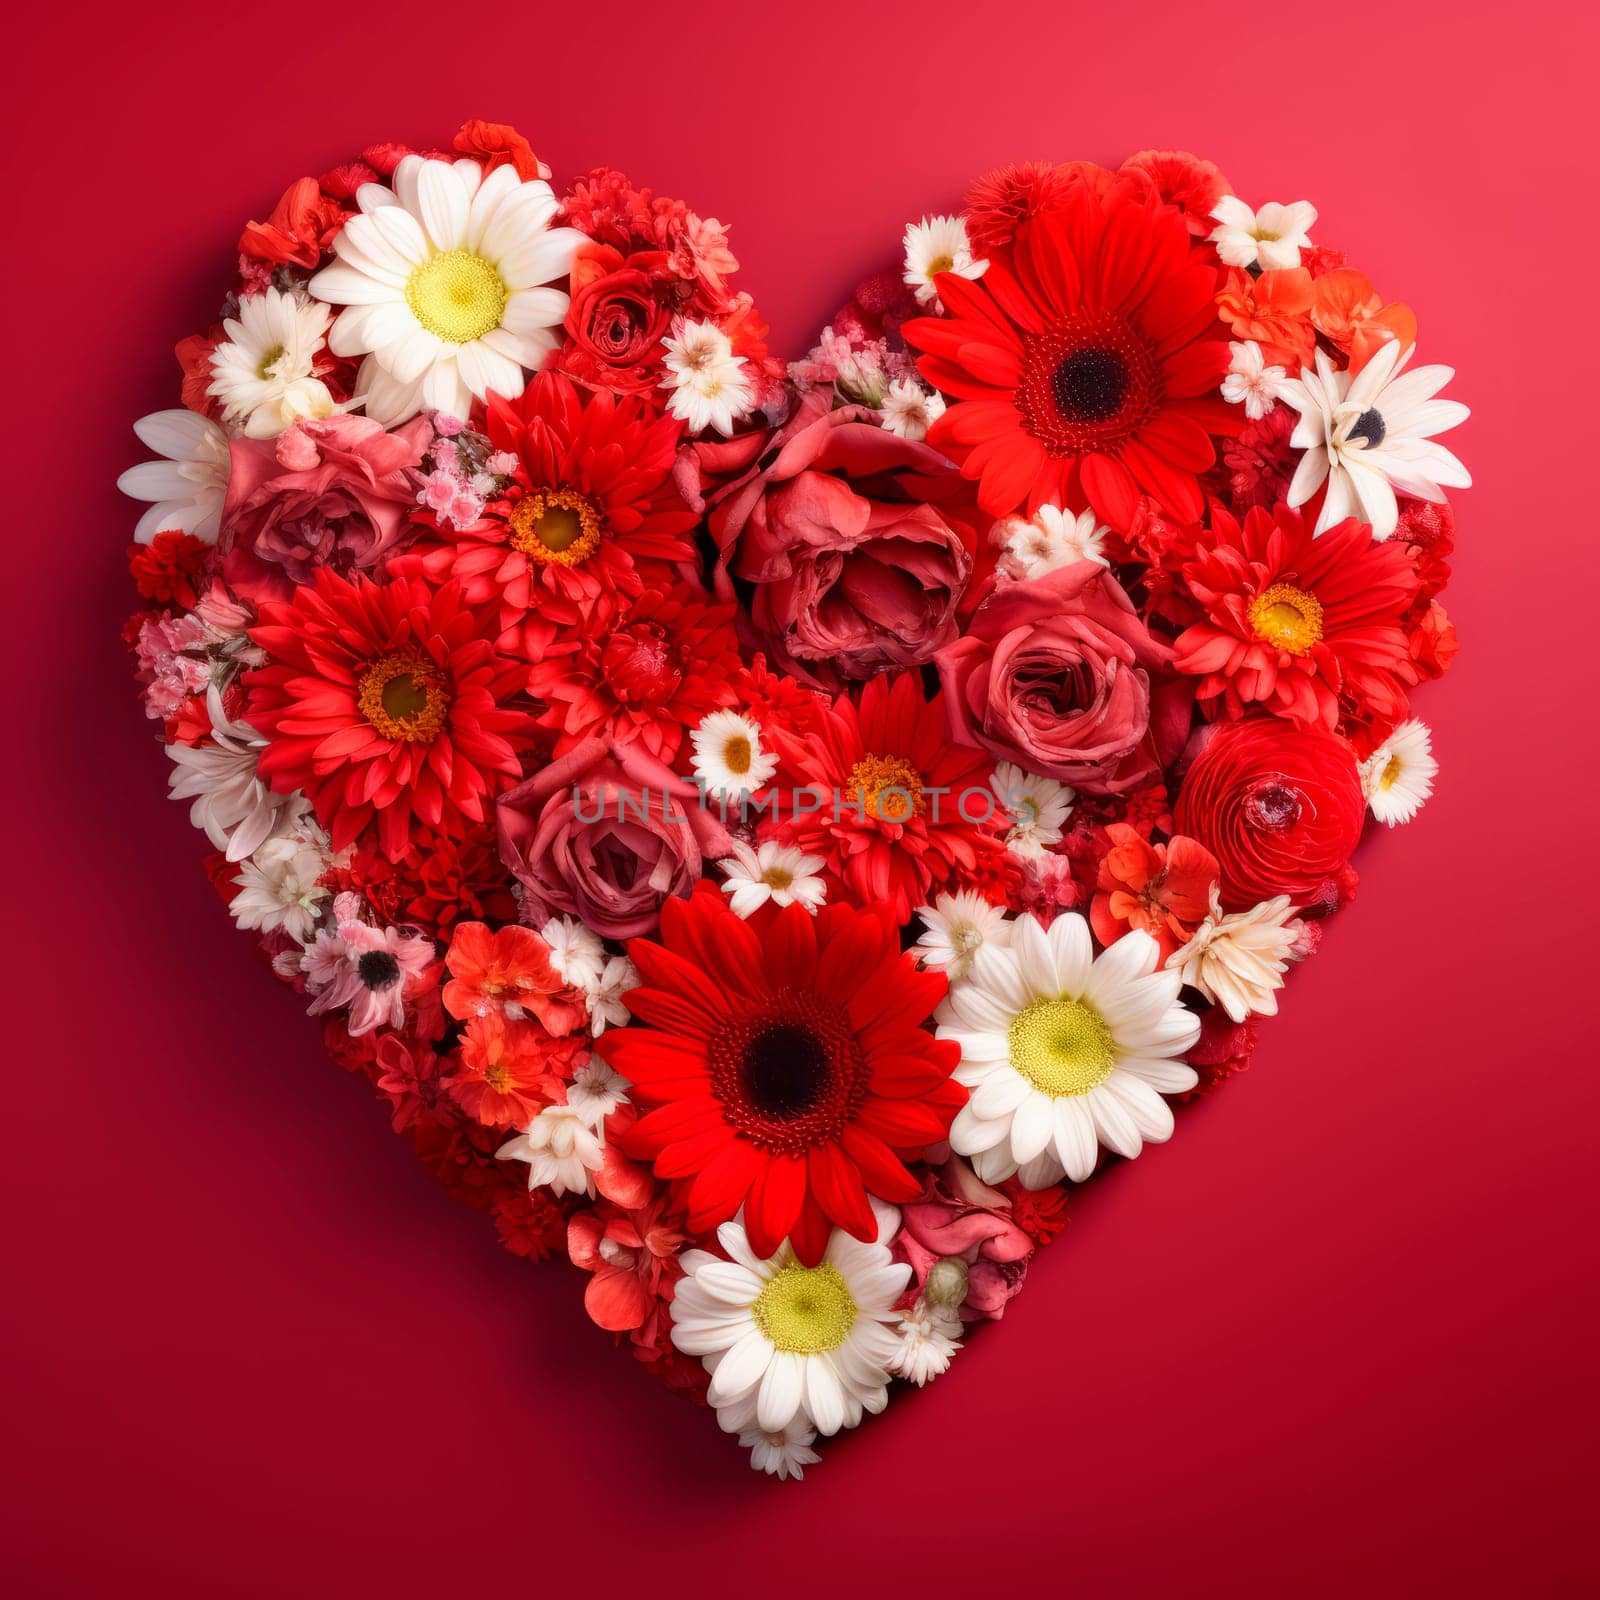 The heart is lined with beautiful flowers on a red background. Minimalism.